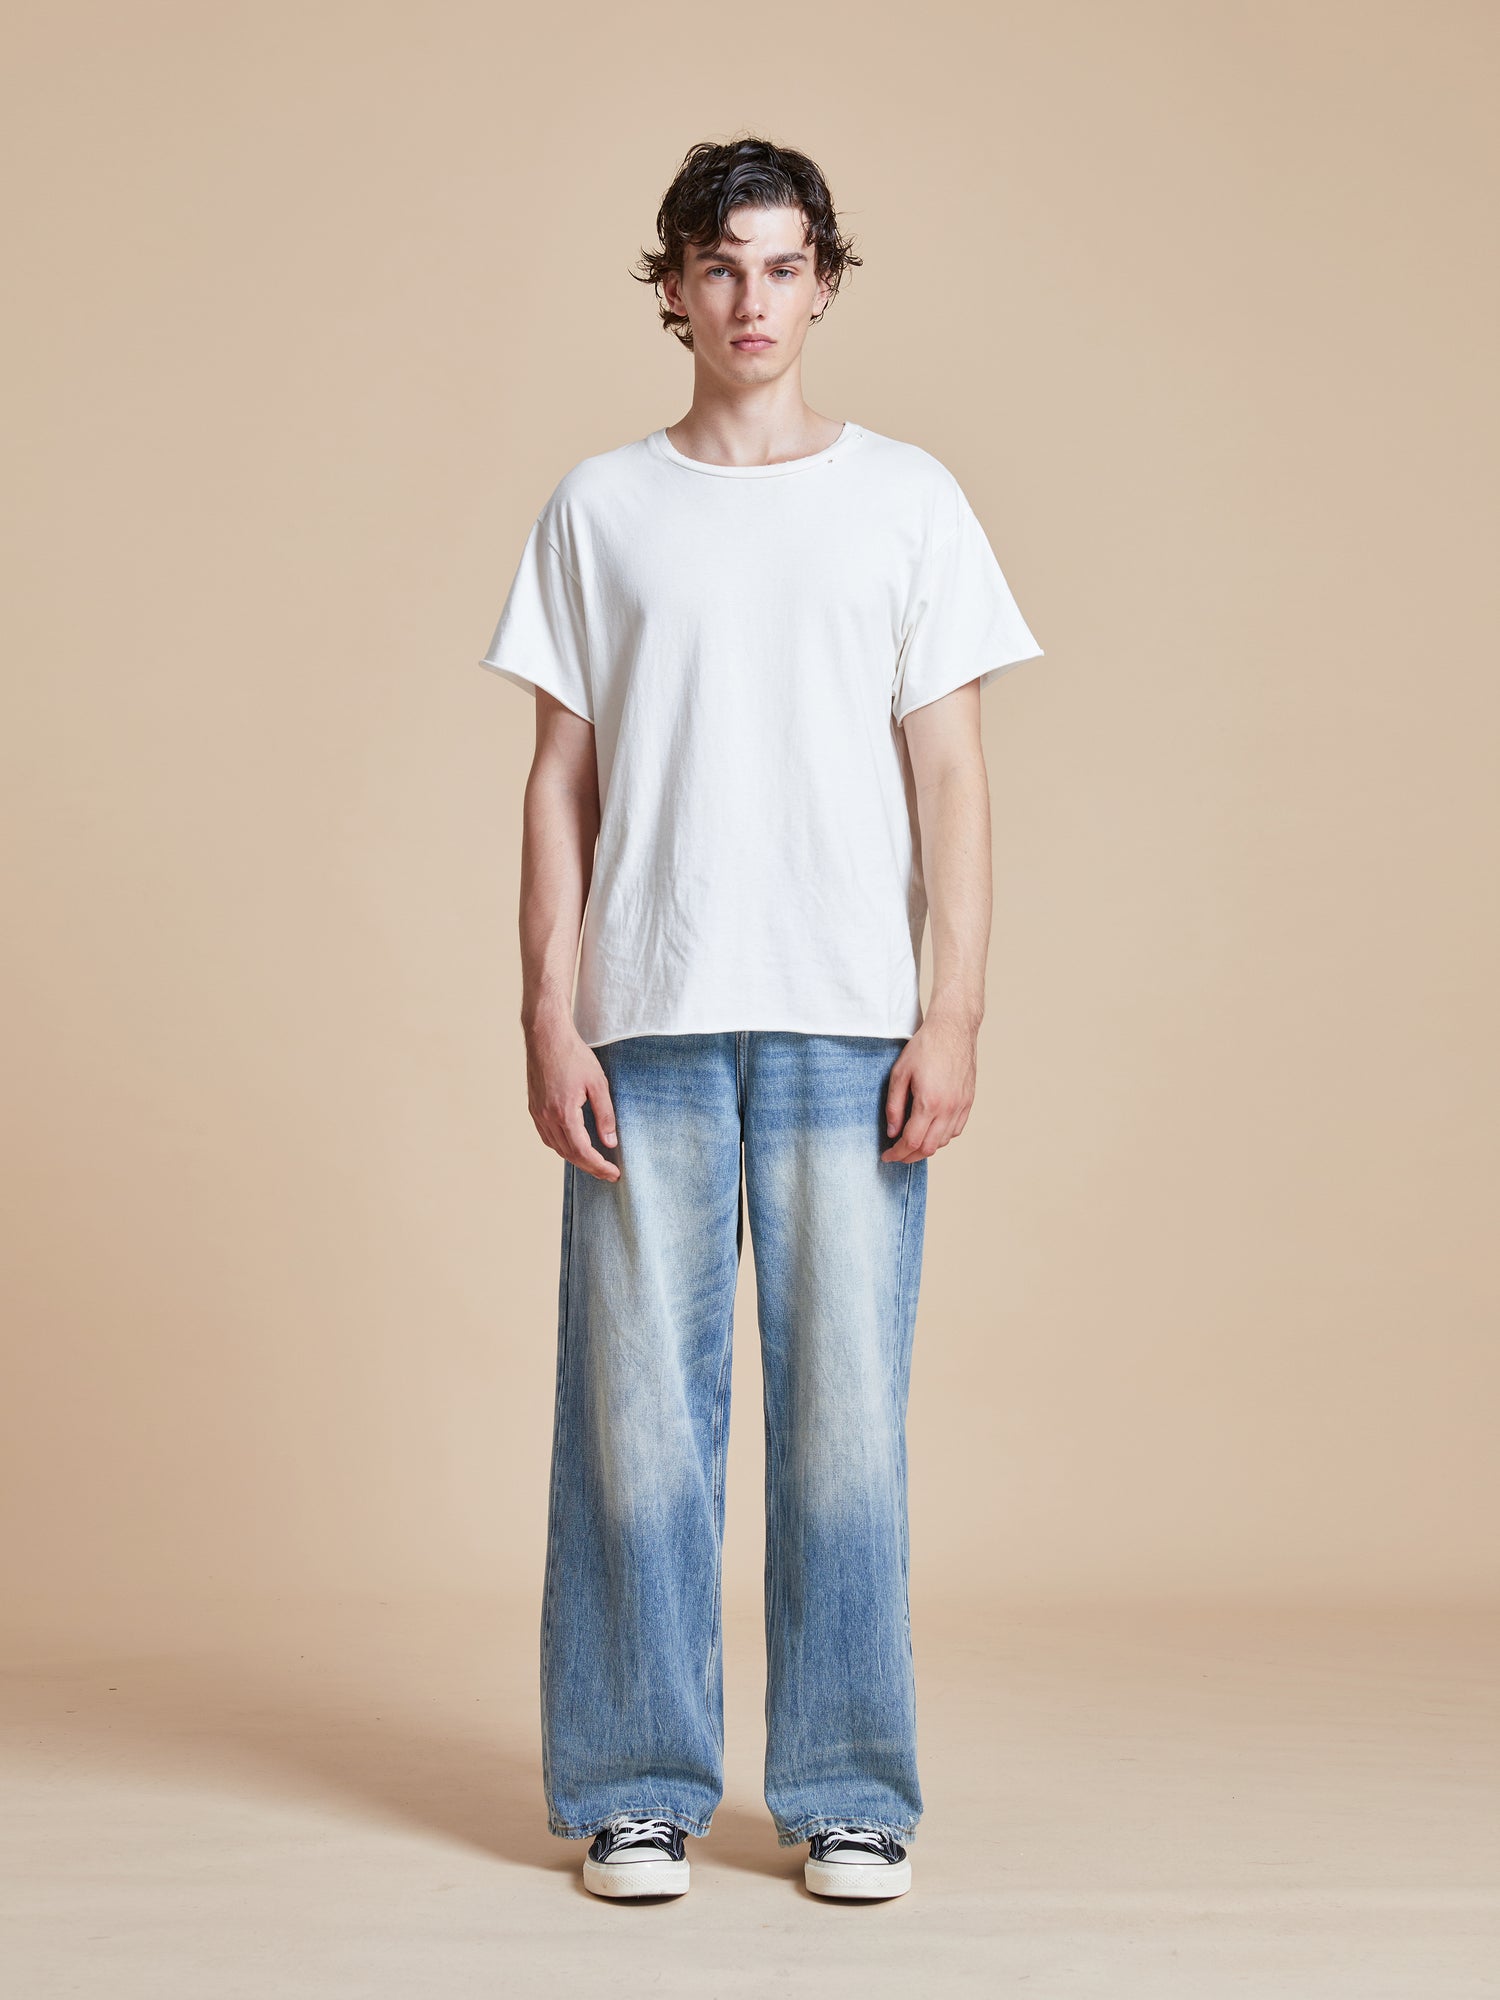 A man wearing a white t-shirt and Found Lacy Baggy Jeans.